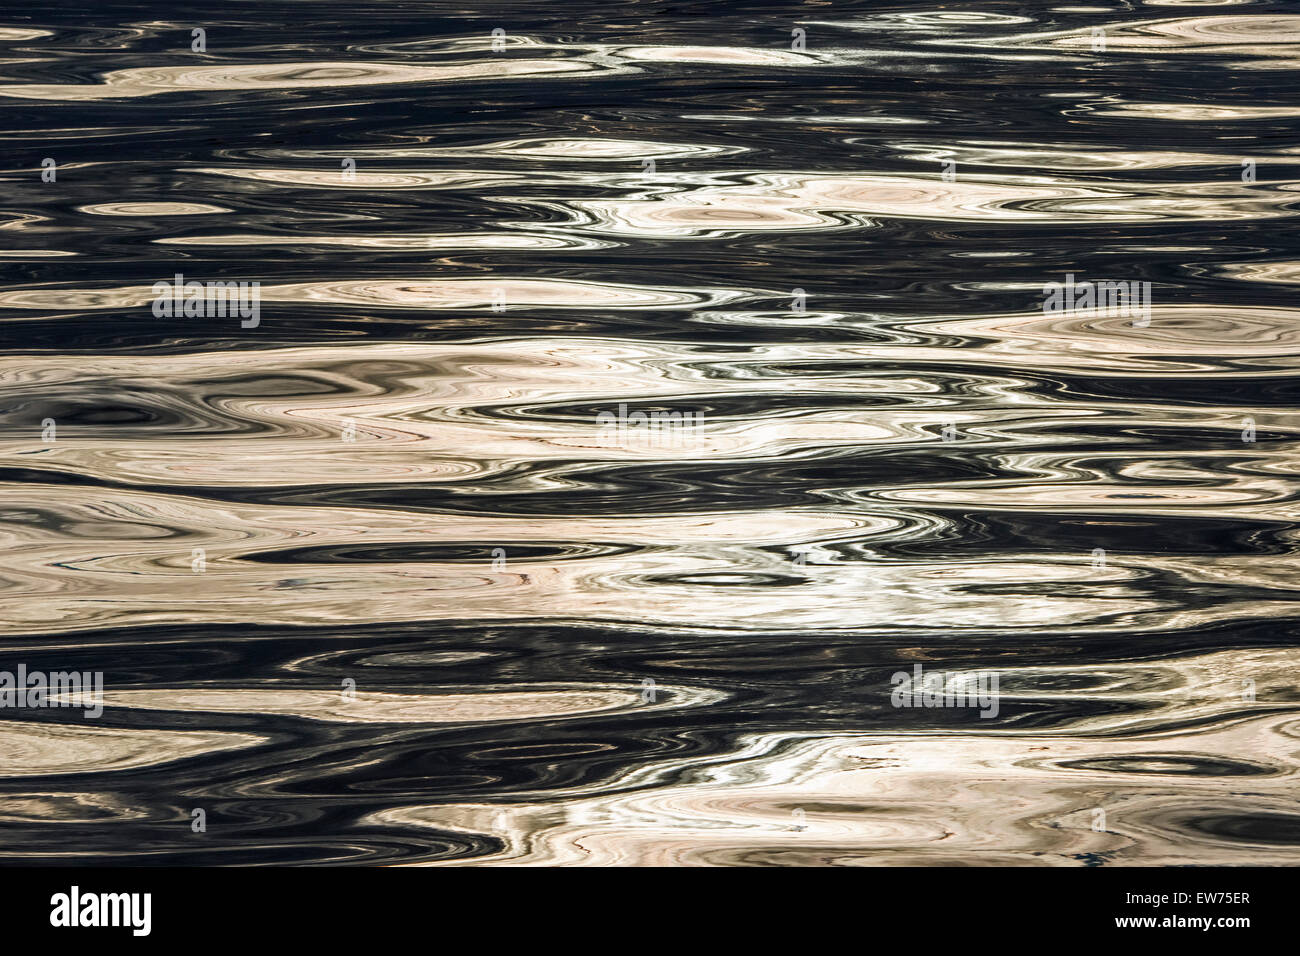 Evening sky and sun reflected on the surface of the sea, Denmark Strait, Greenland Stock Photo